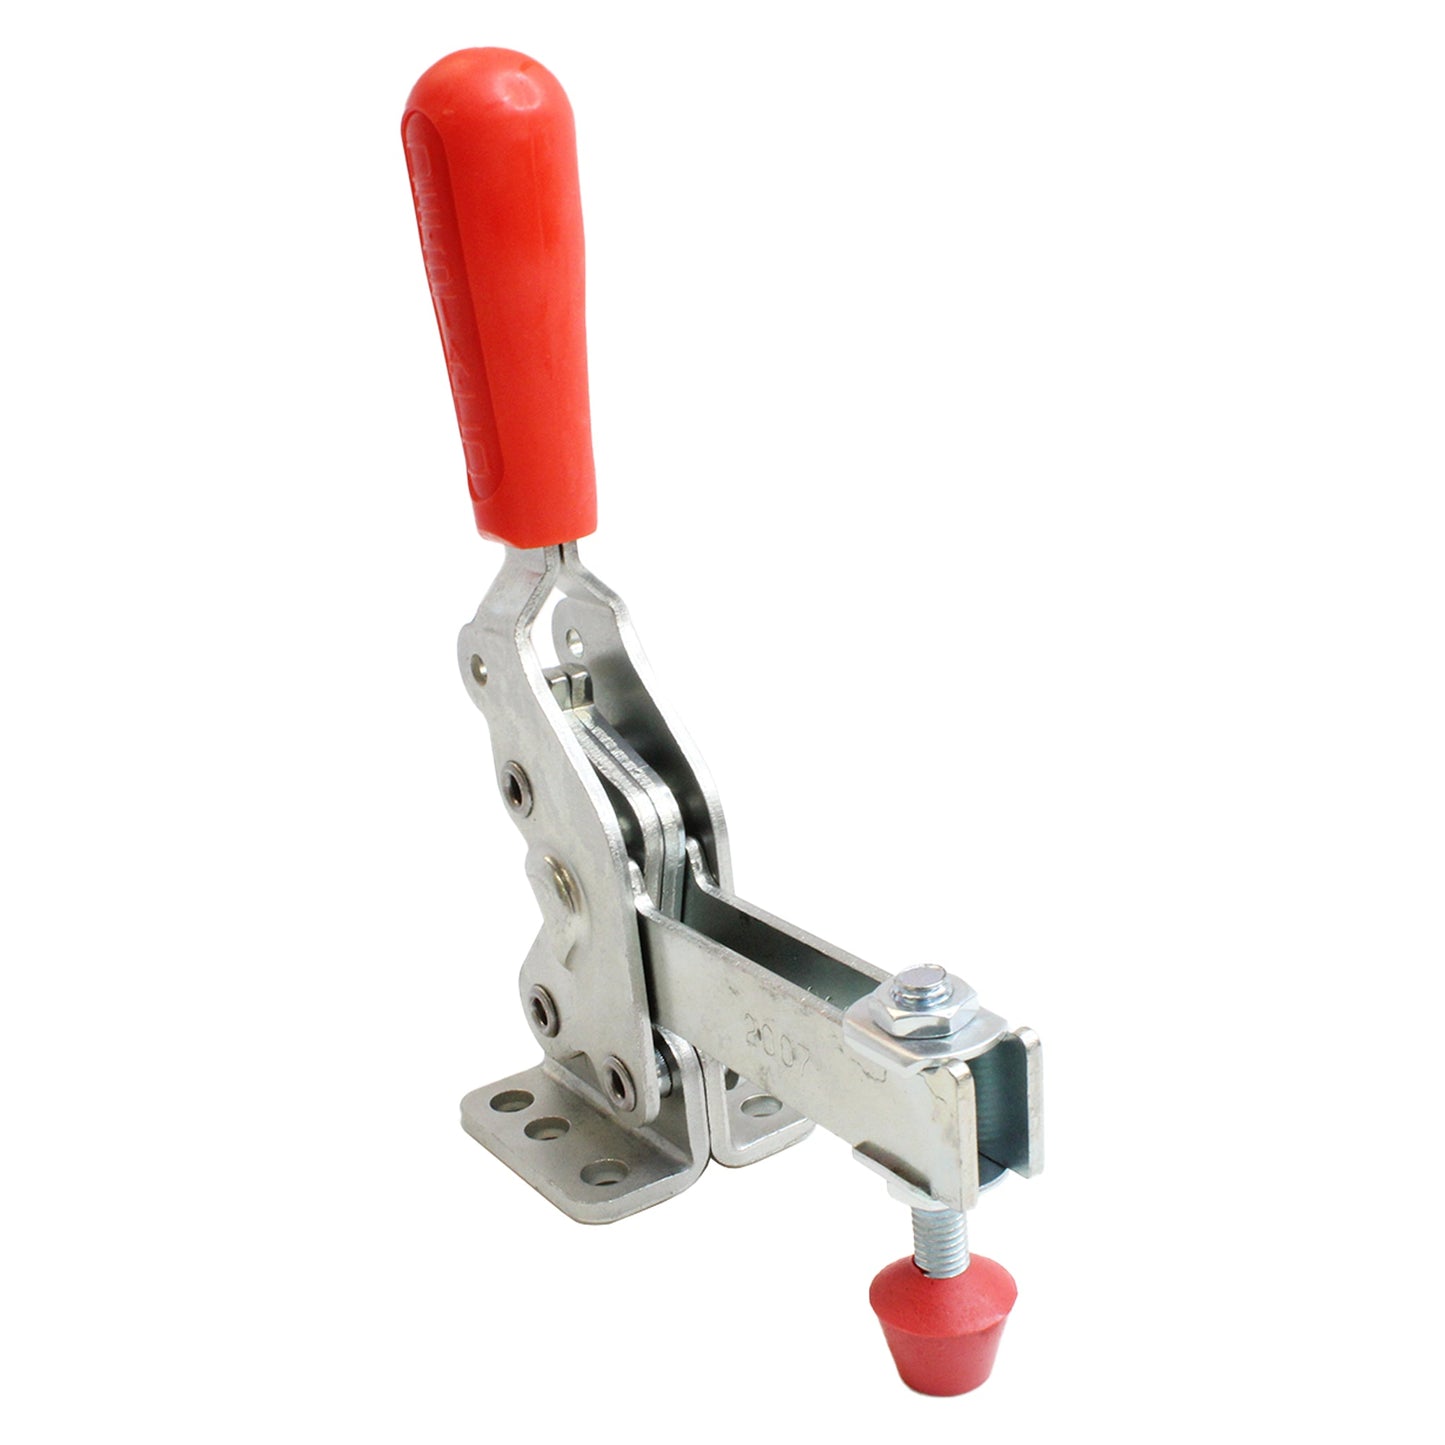 De-Sta-Co 1000Lbs Vertical Manual Hold Down Clamp Other Clamp 2007-U